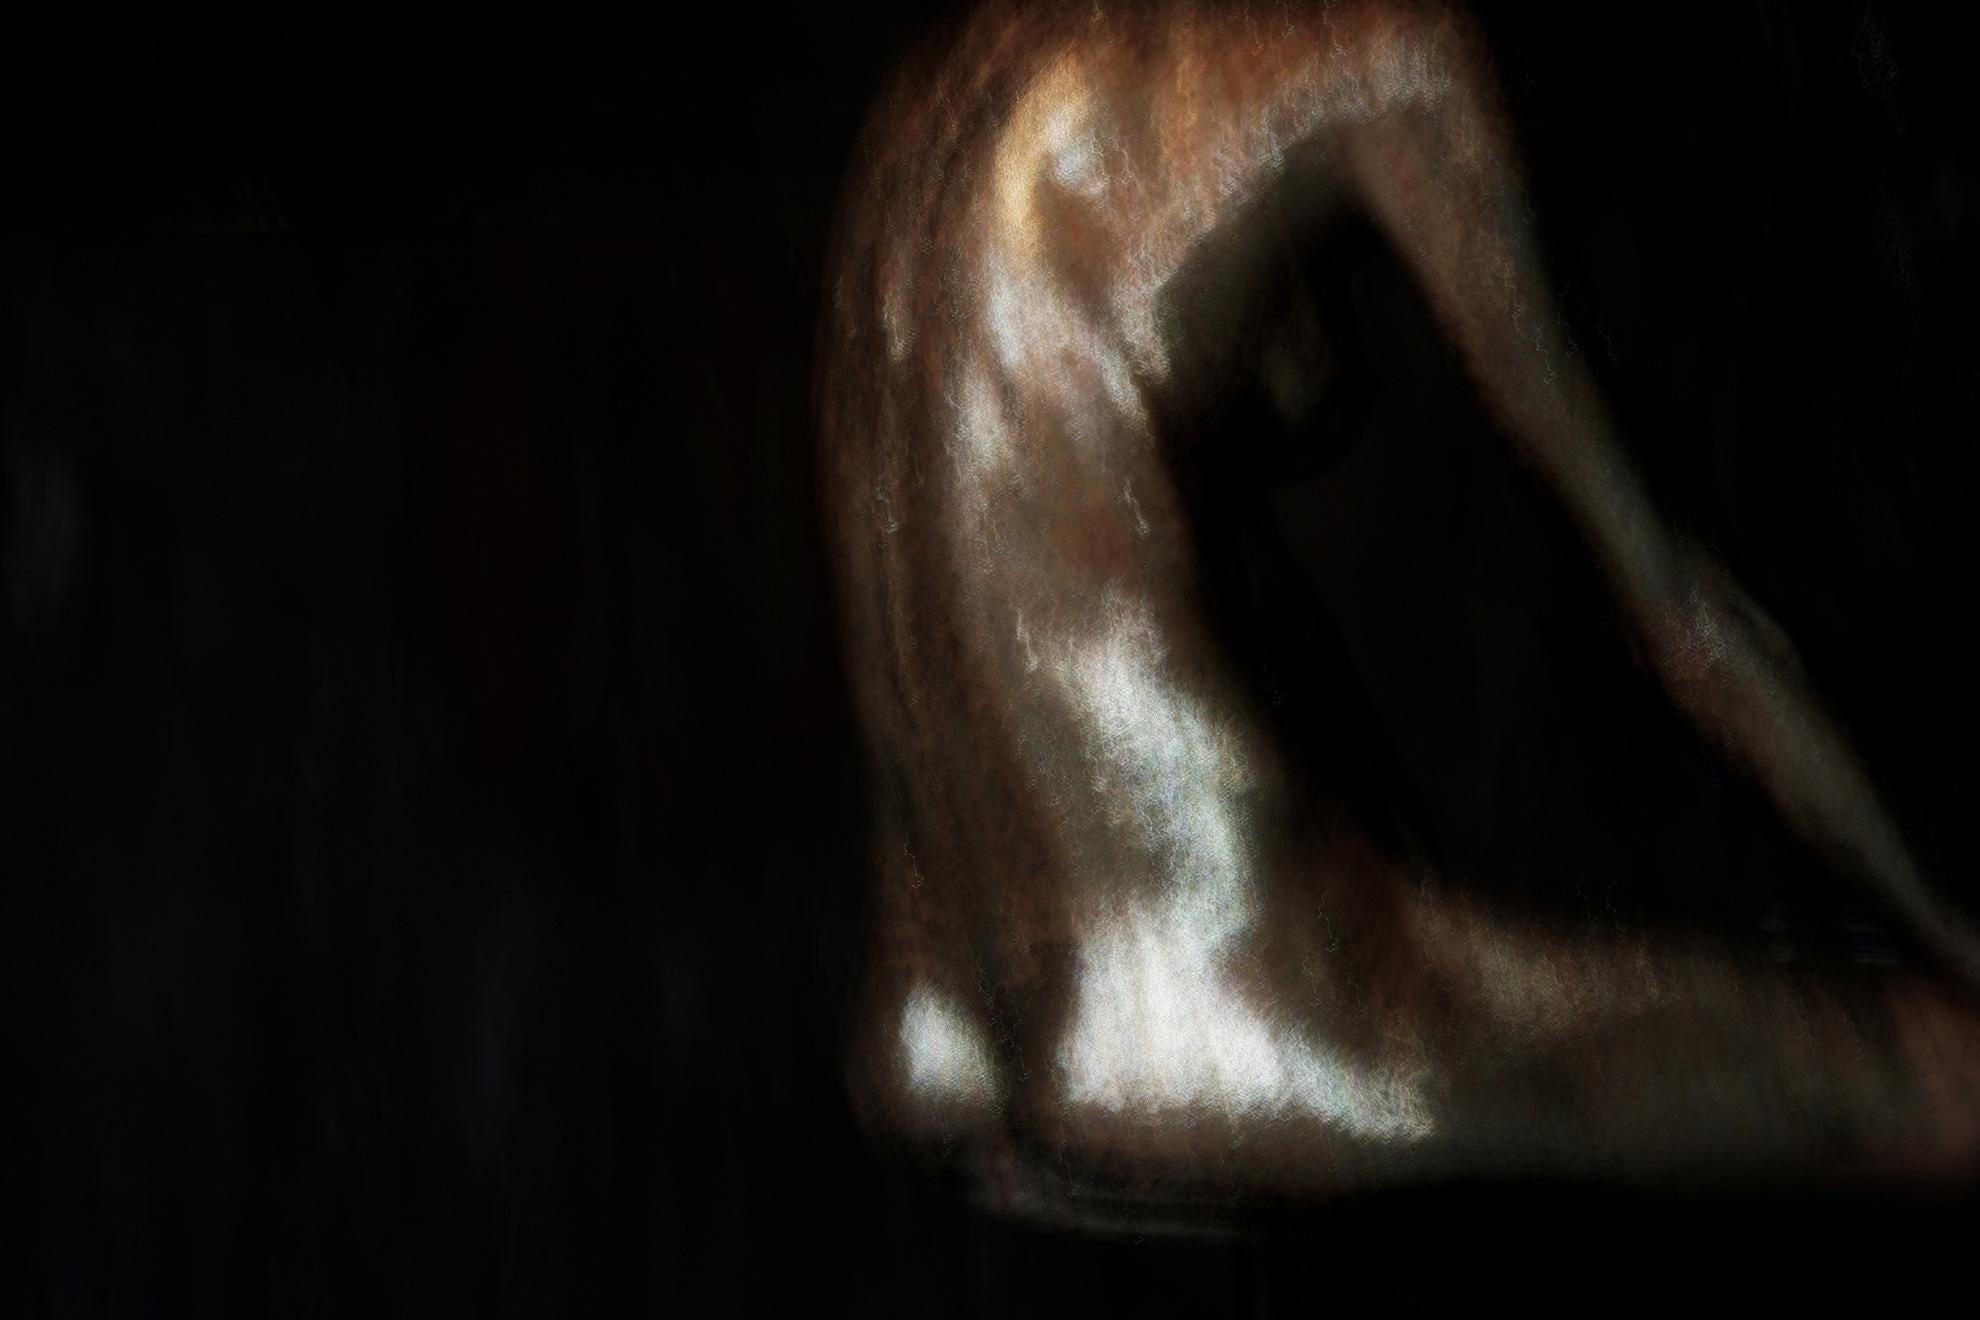 Sitting Woman - Abstract Expressionist Art Photography